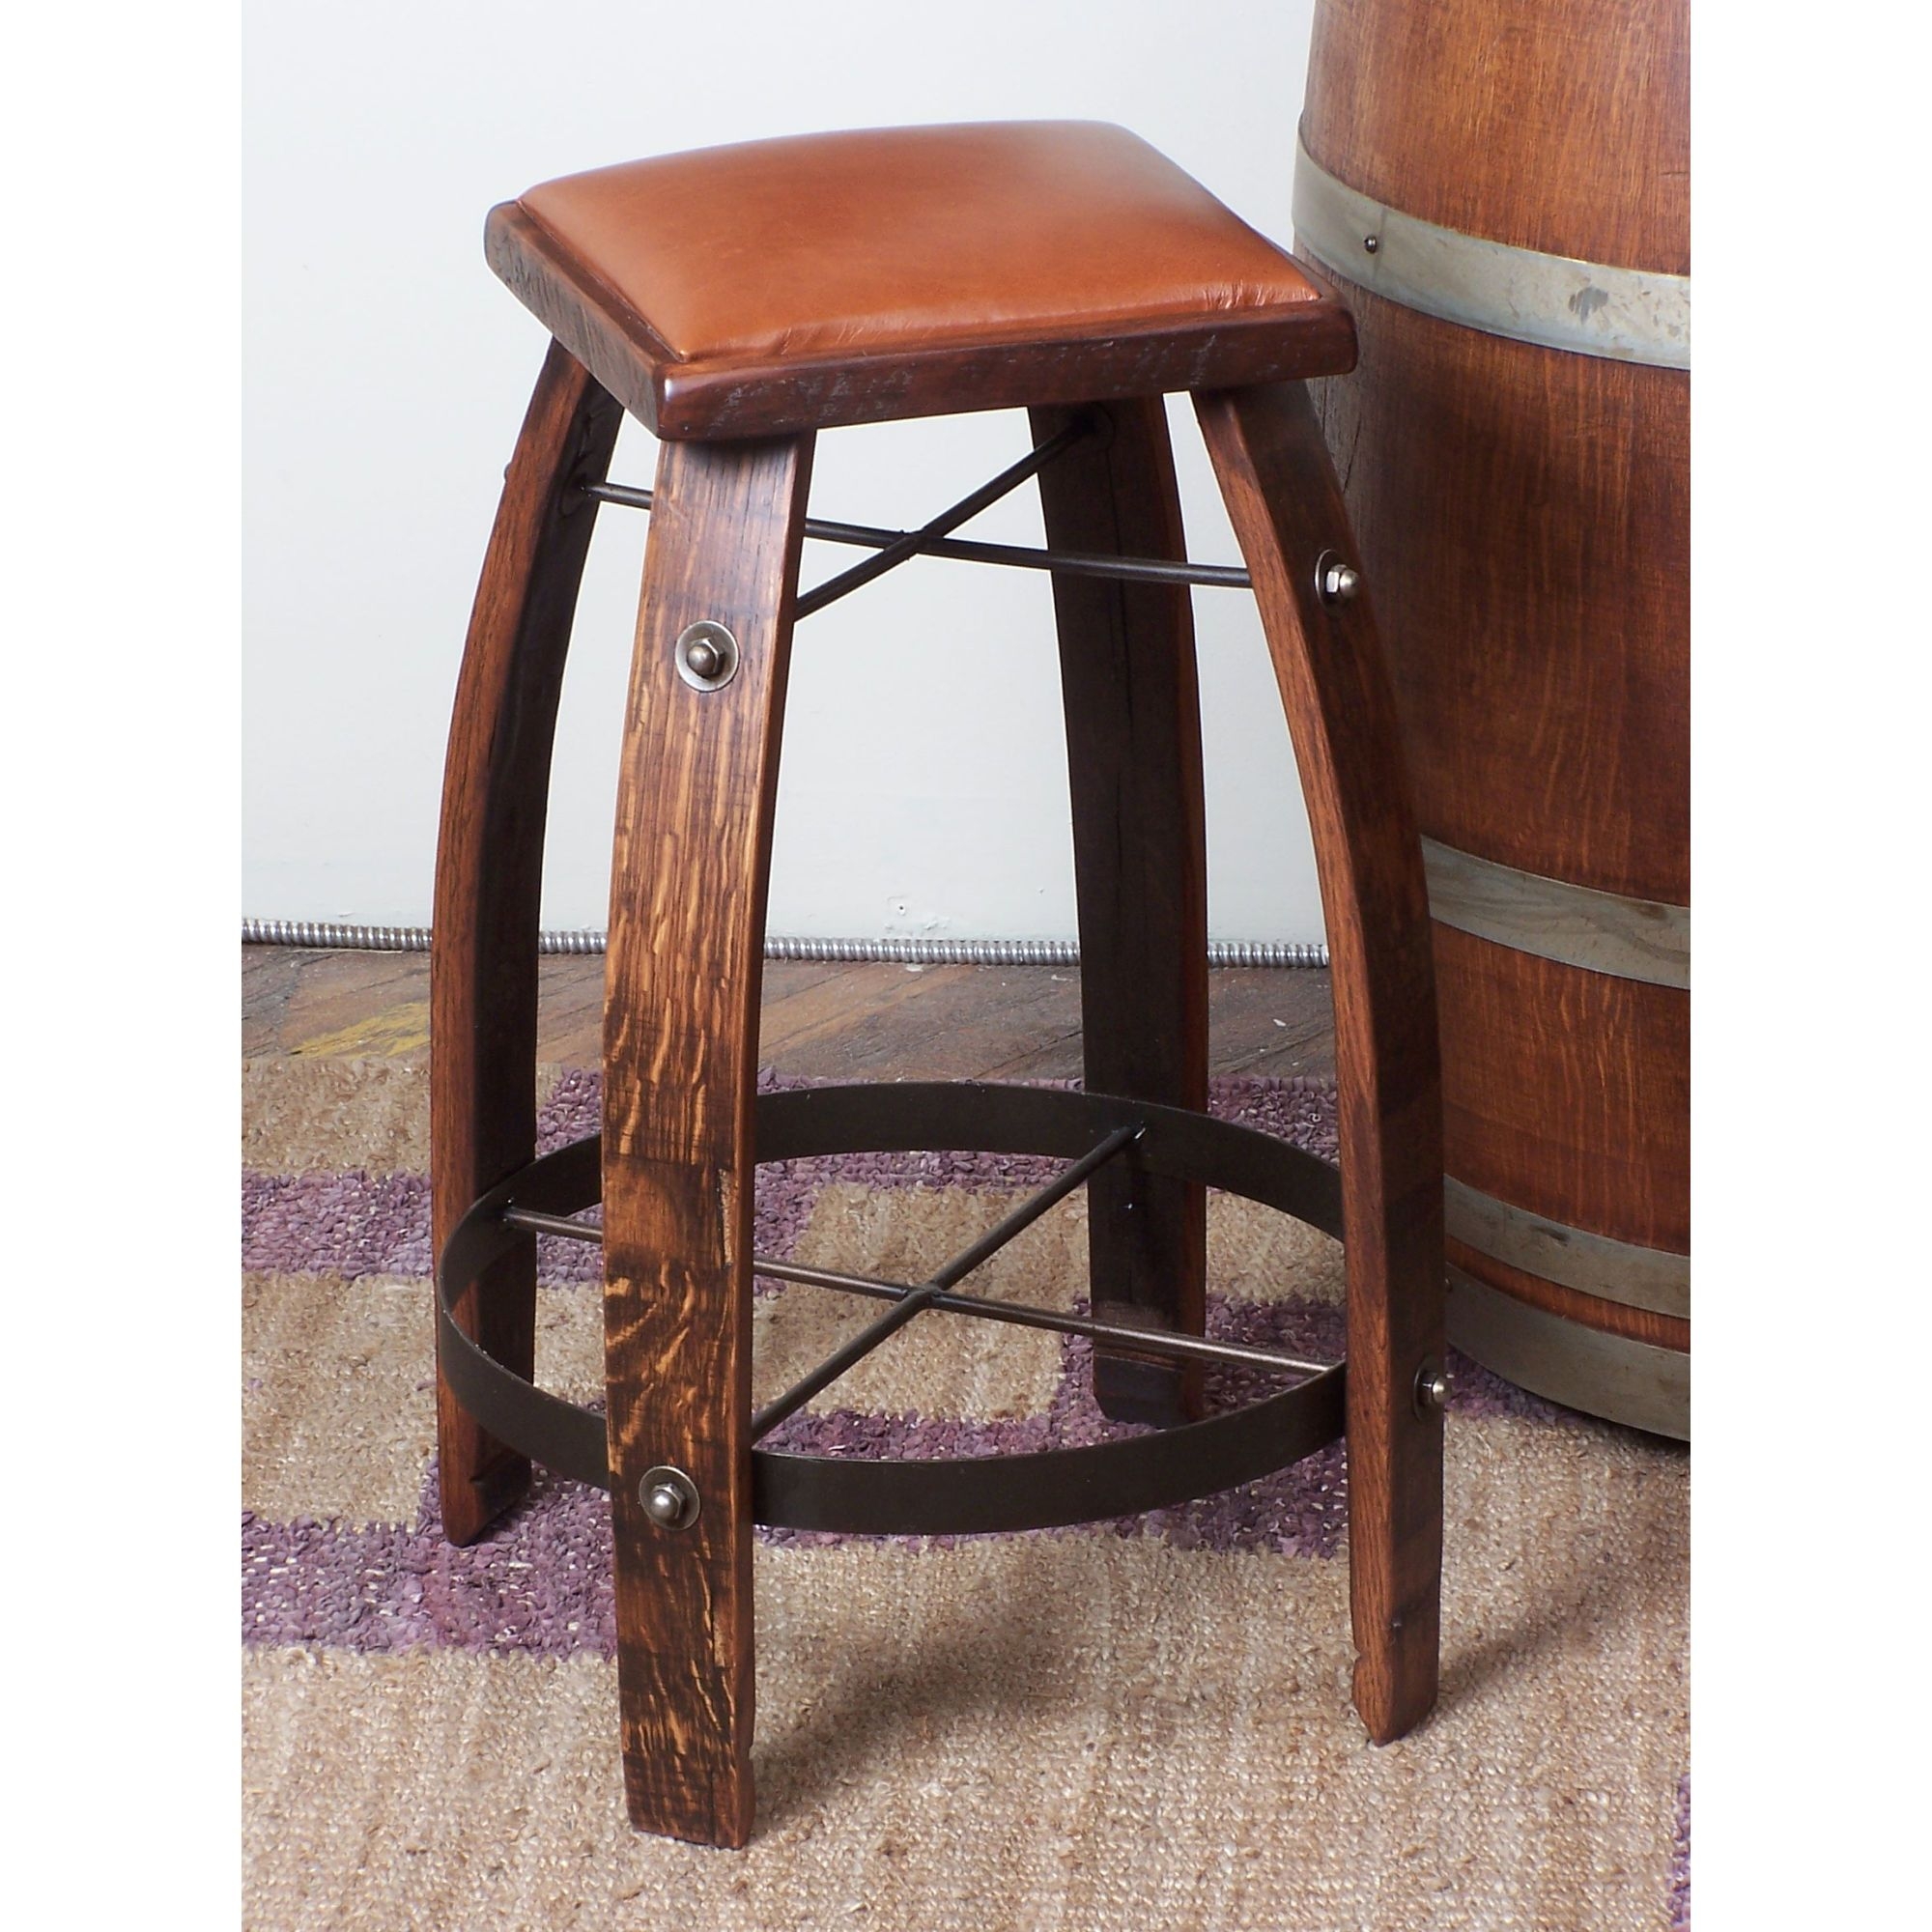 30" Stave Stool w/ Tan Leather Seat - Made from Wine Barrels (Pine Finish)